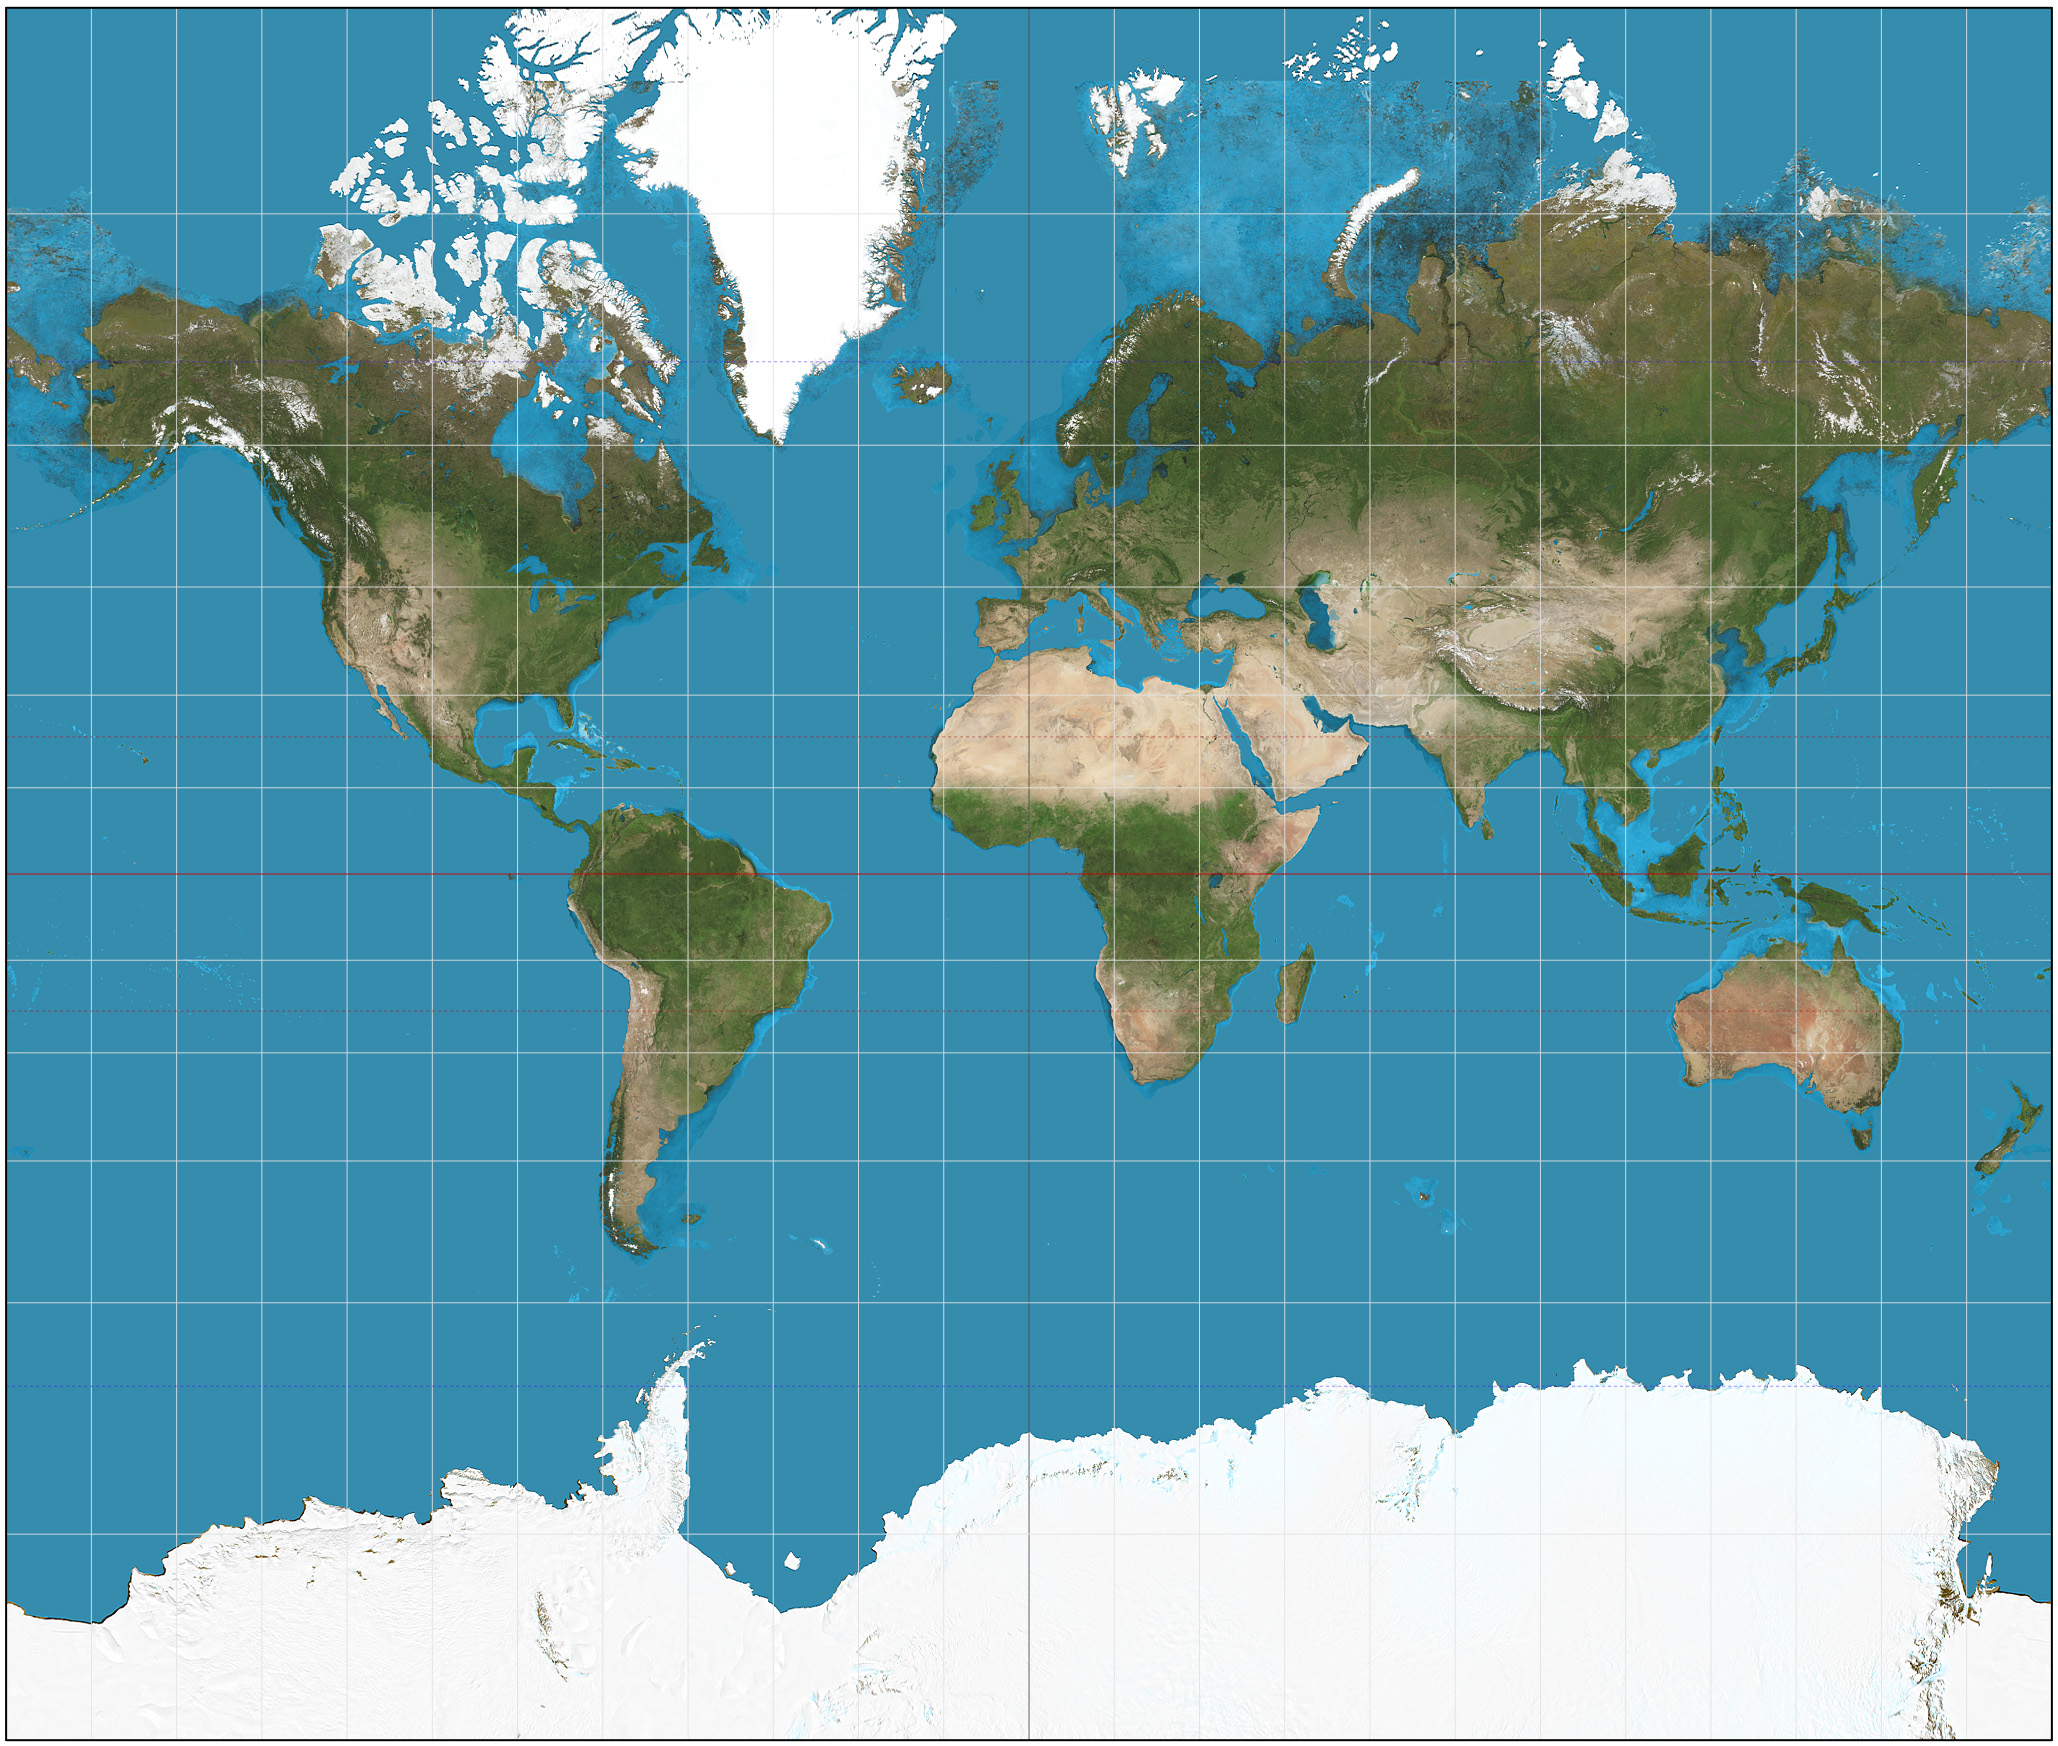 Which map projection is most commonly used?